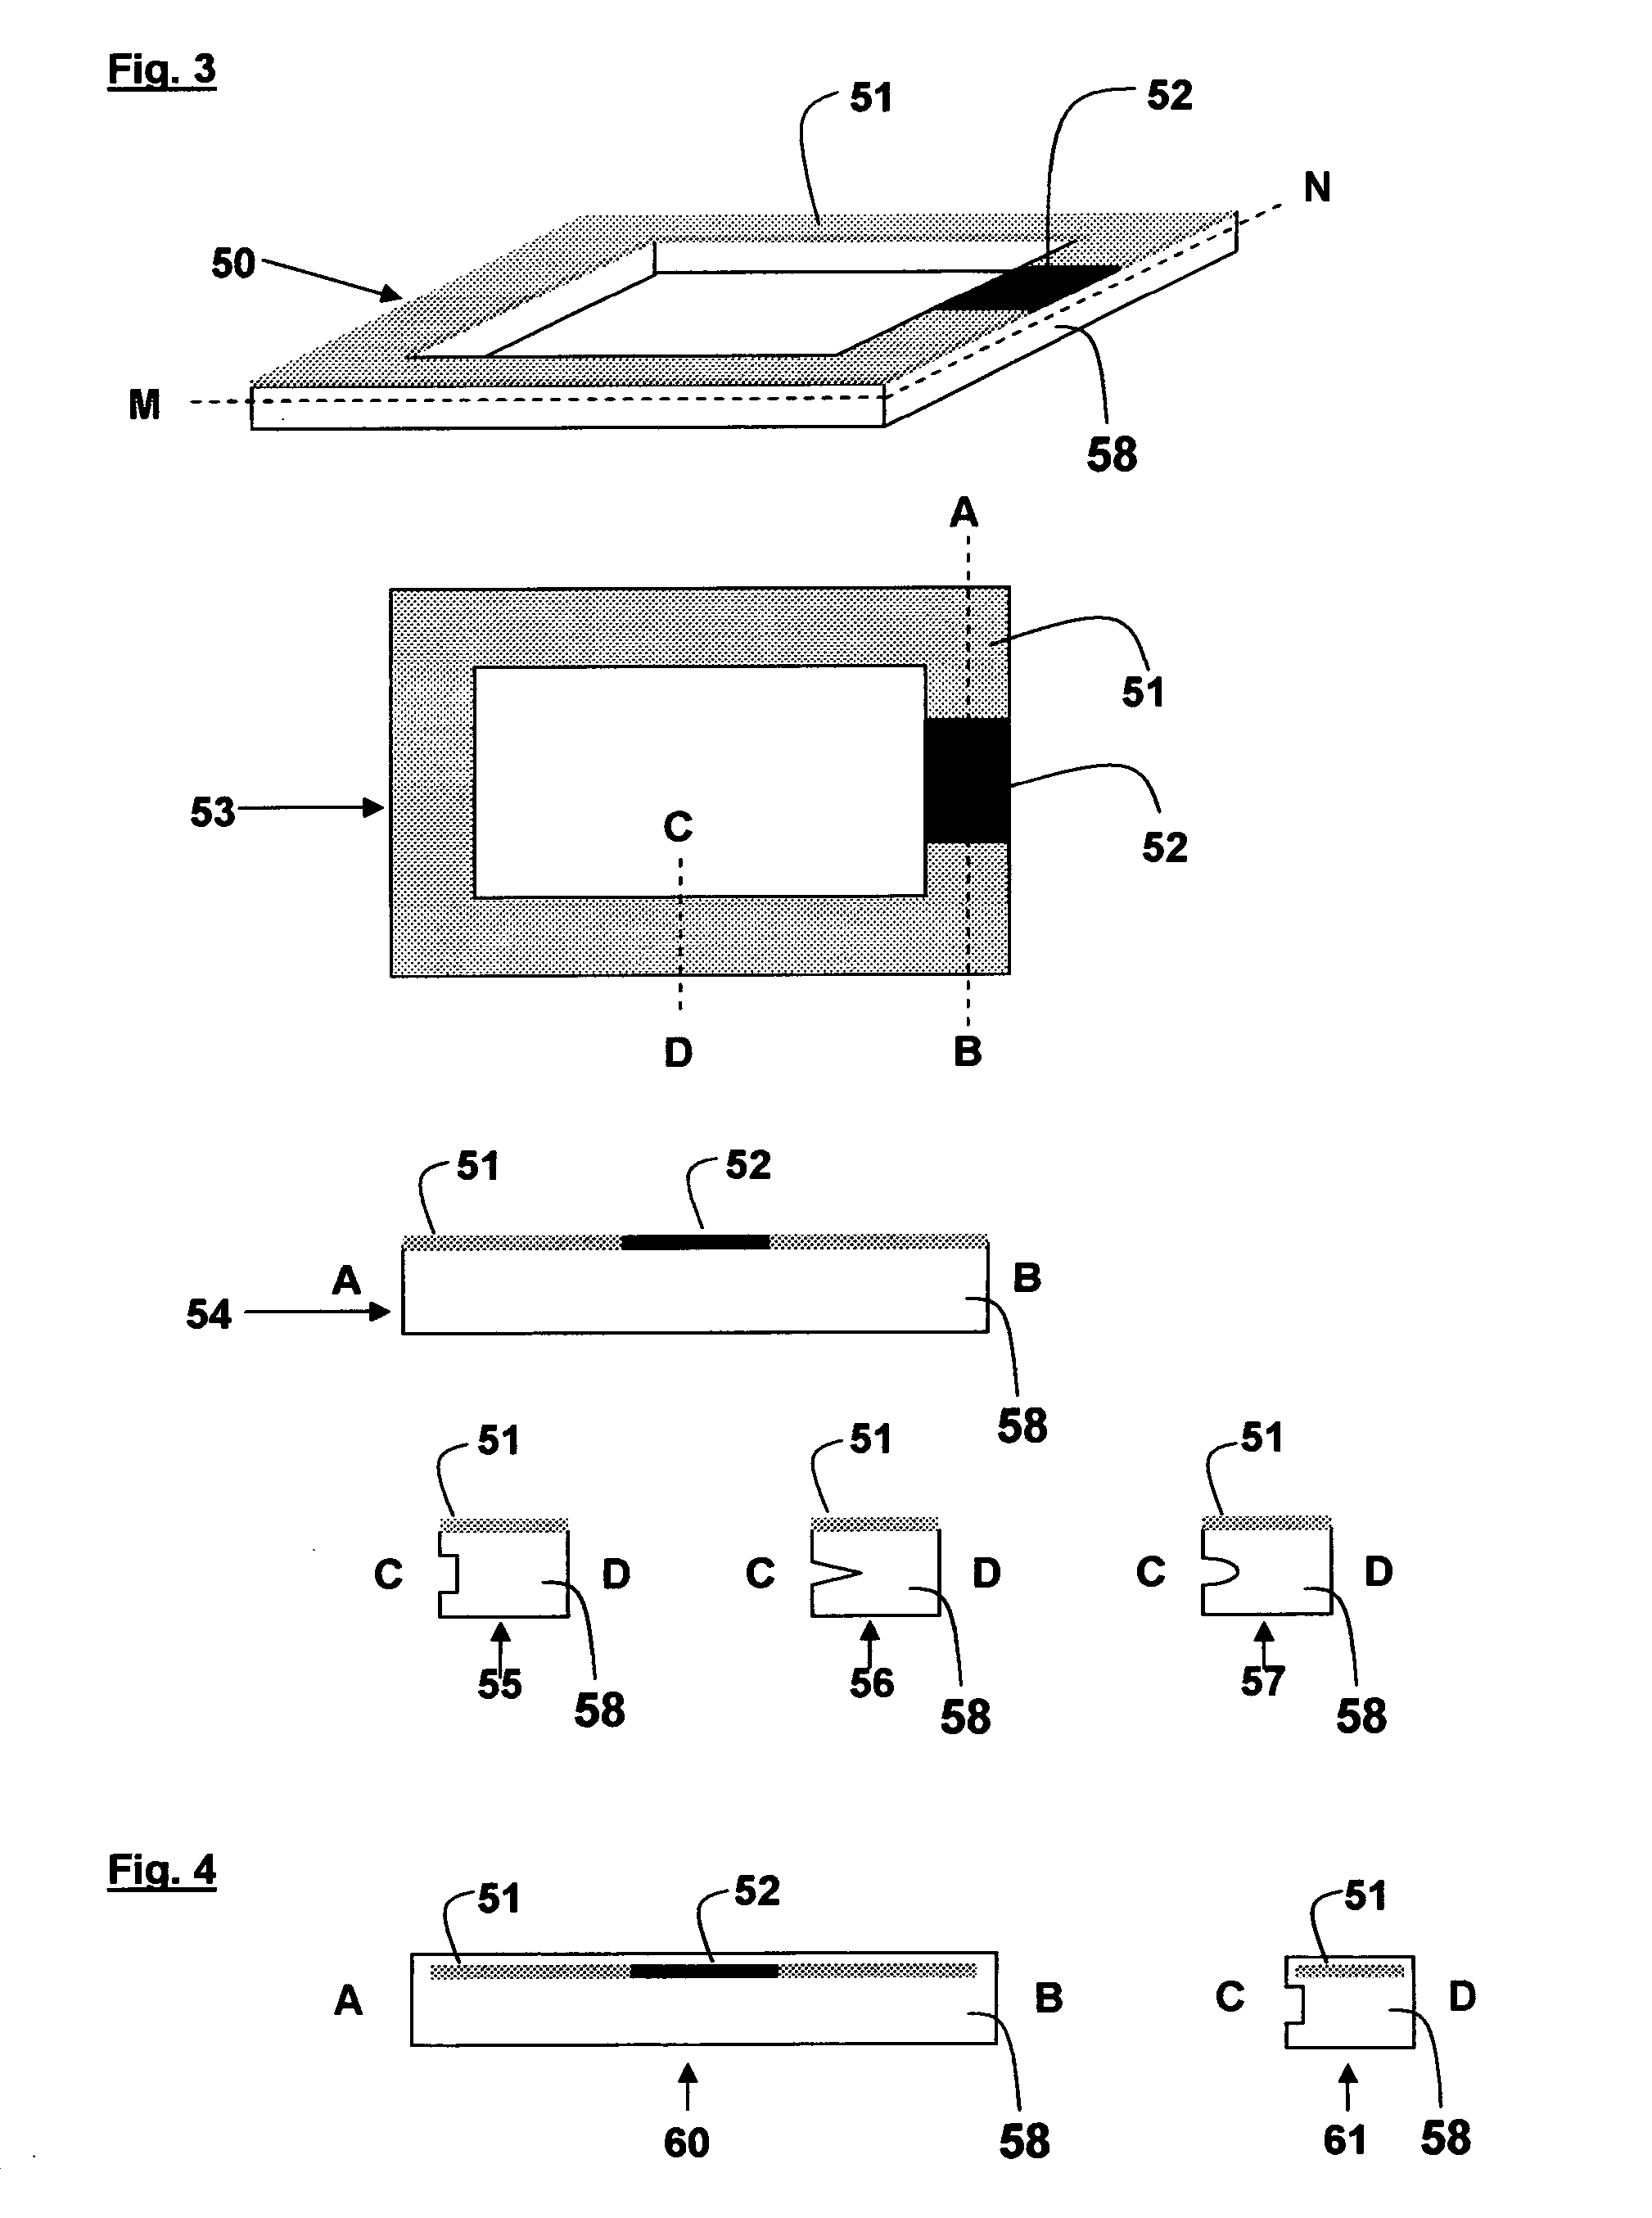 Method to turn biological tissue sample cassettes into traceable devices, using a system with inlays tagged with radio frequency indentification (RFID) chips